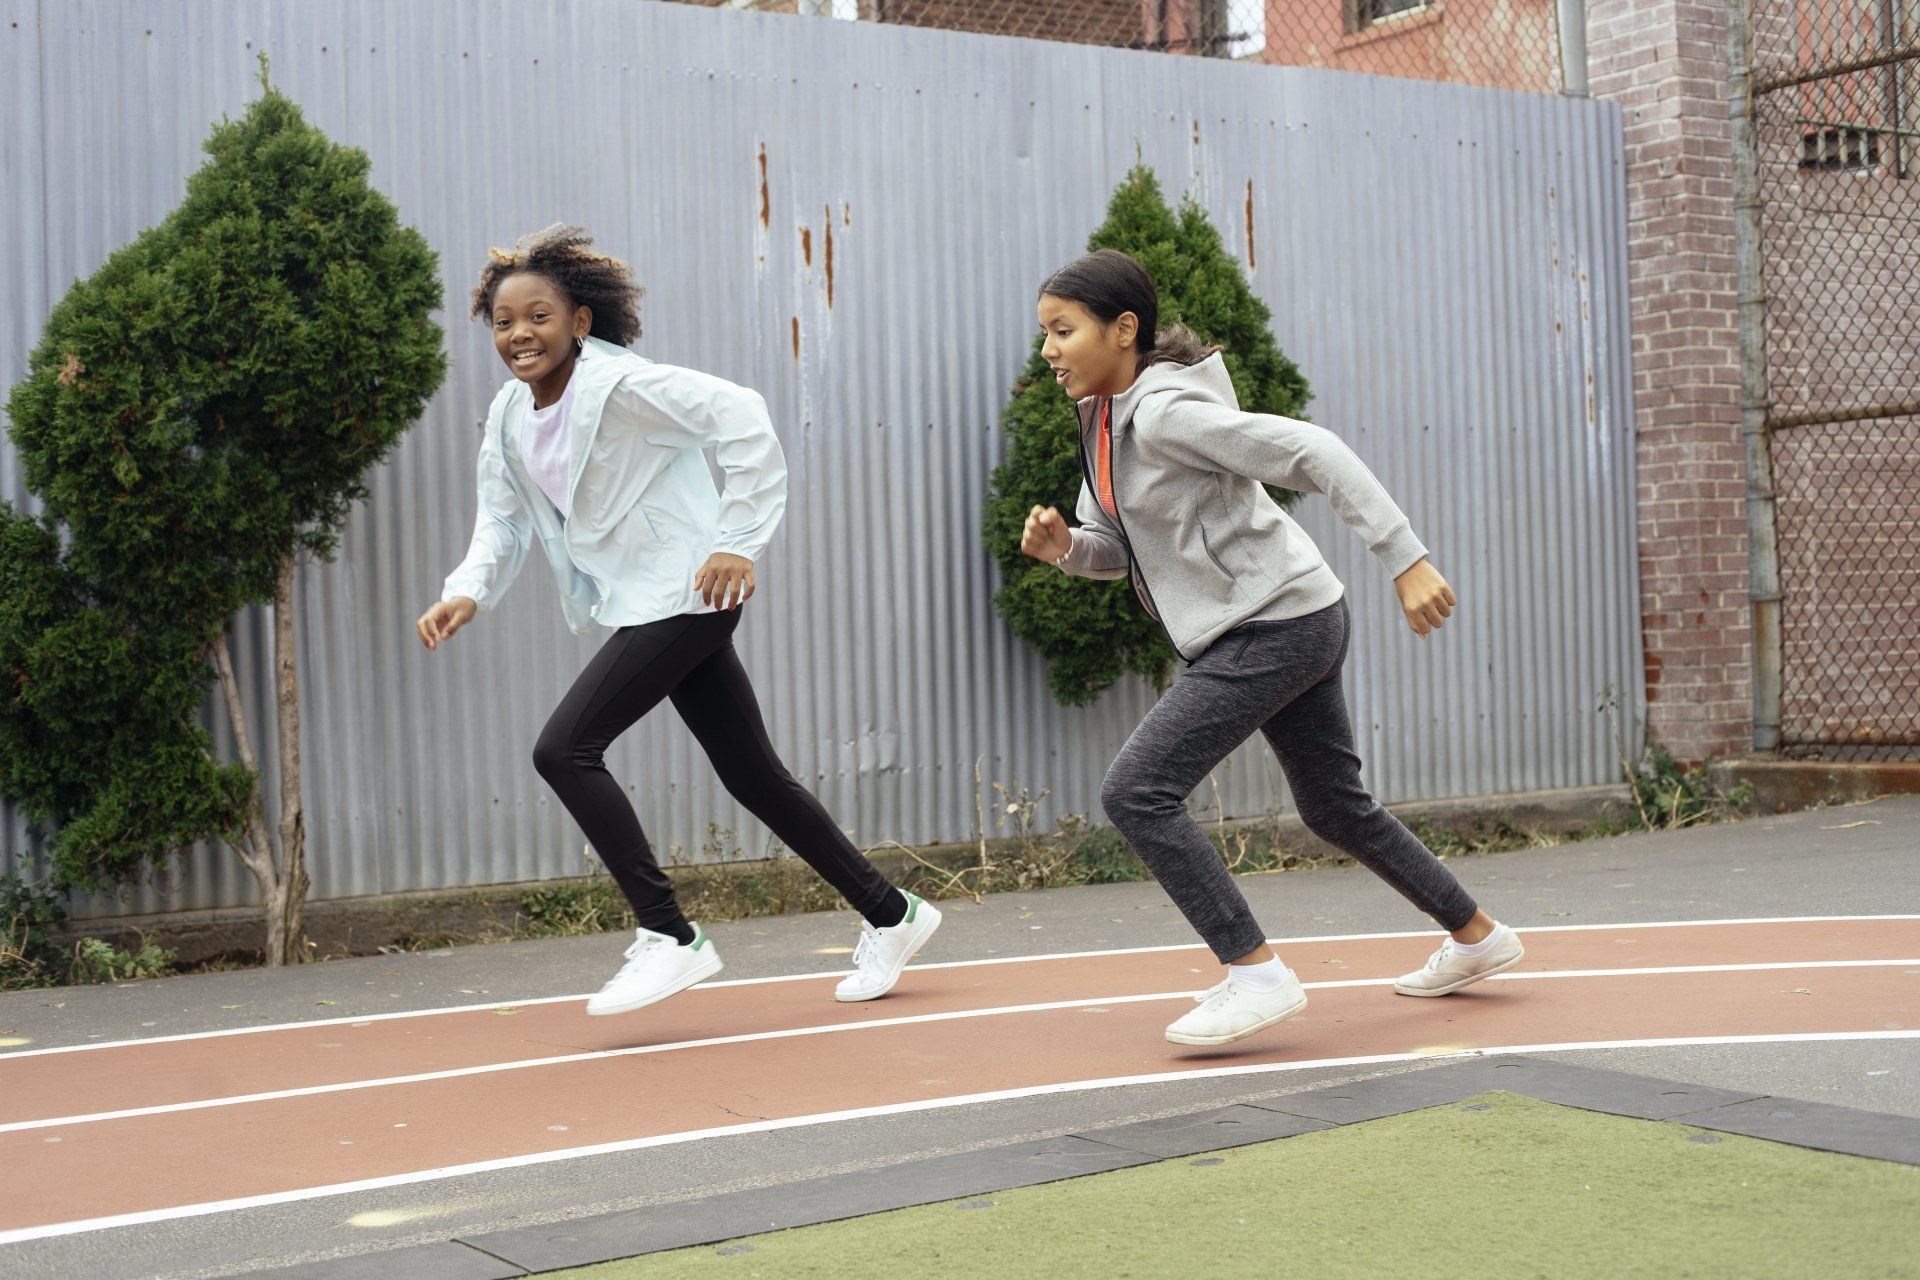 two young girls are running on a track.